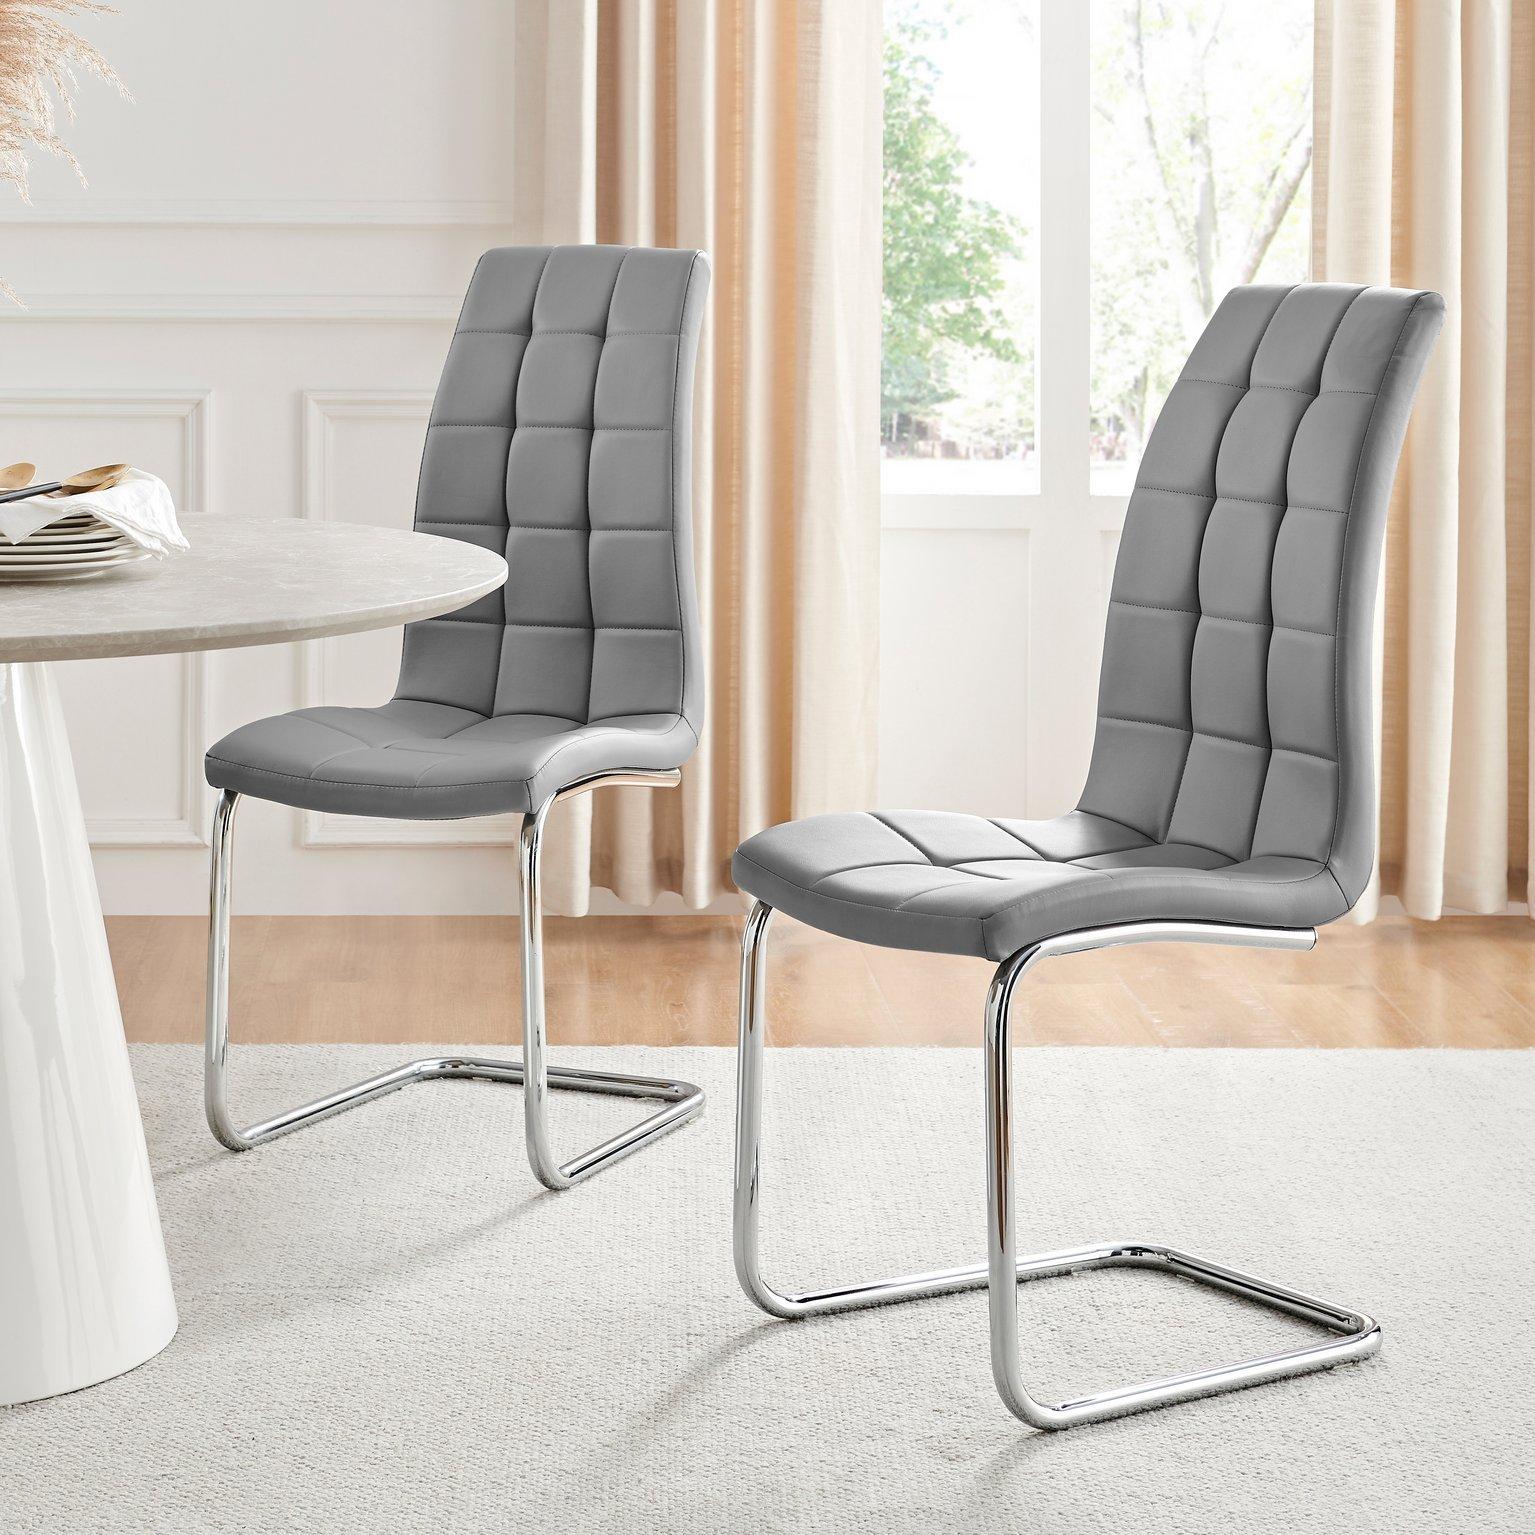 Set of 2 Murano Deep Cushioned Soft Touch Faux Leather Dining Chairs With Silver Chrome Metal Legs